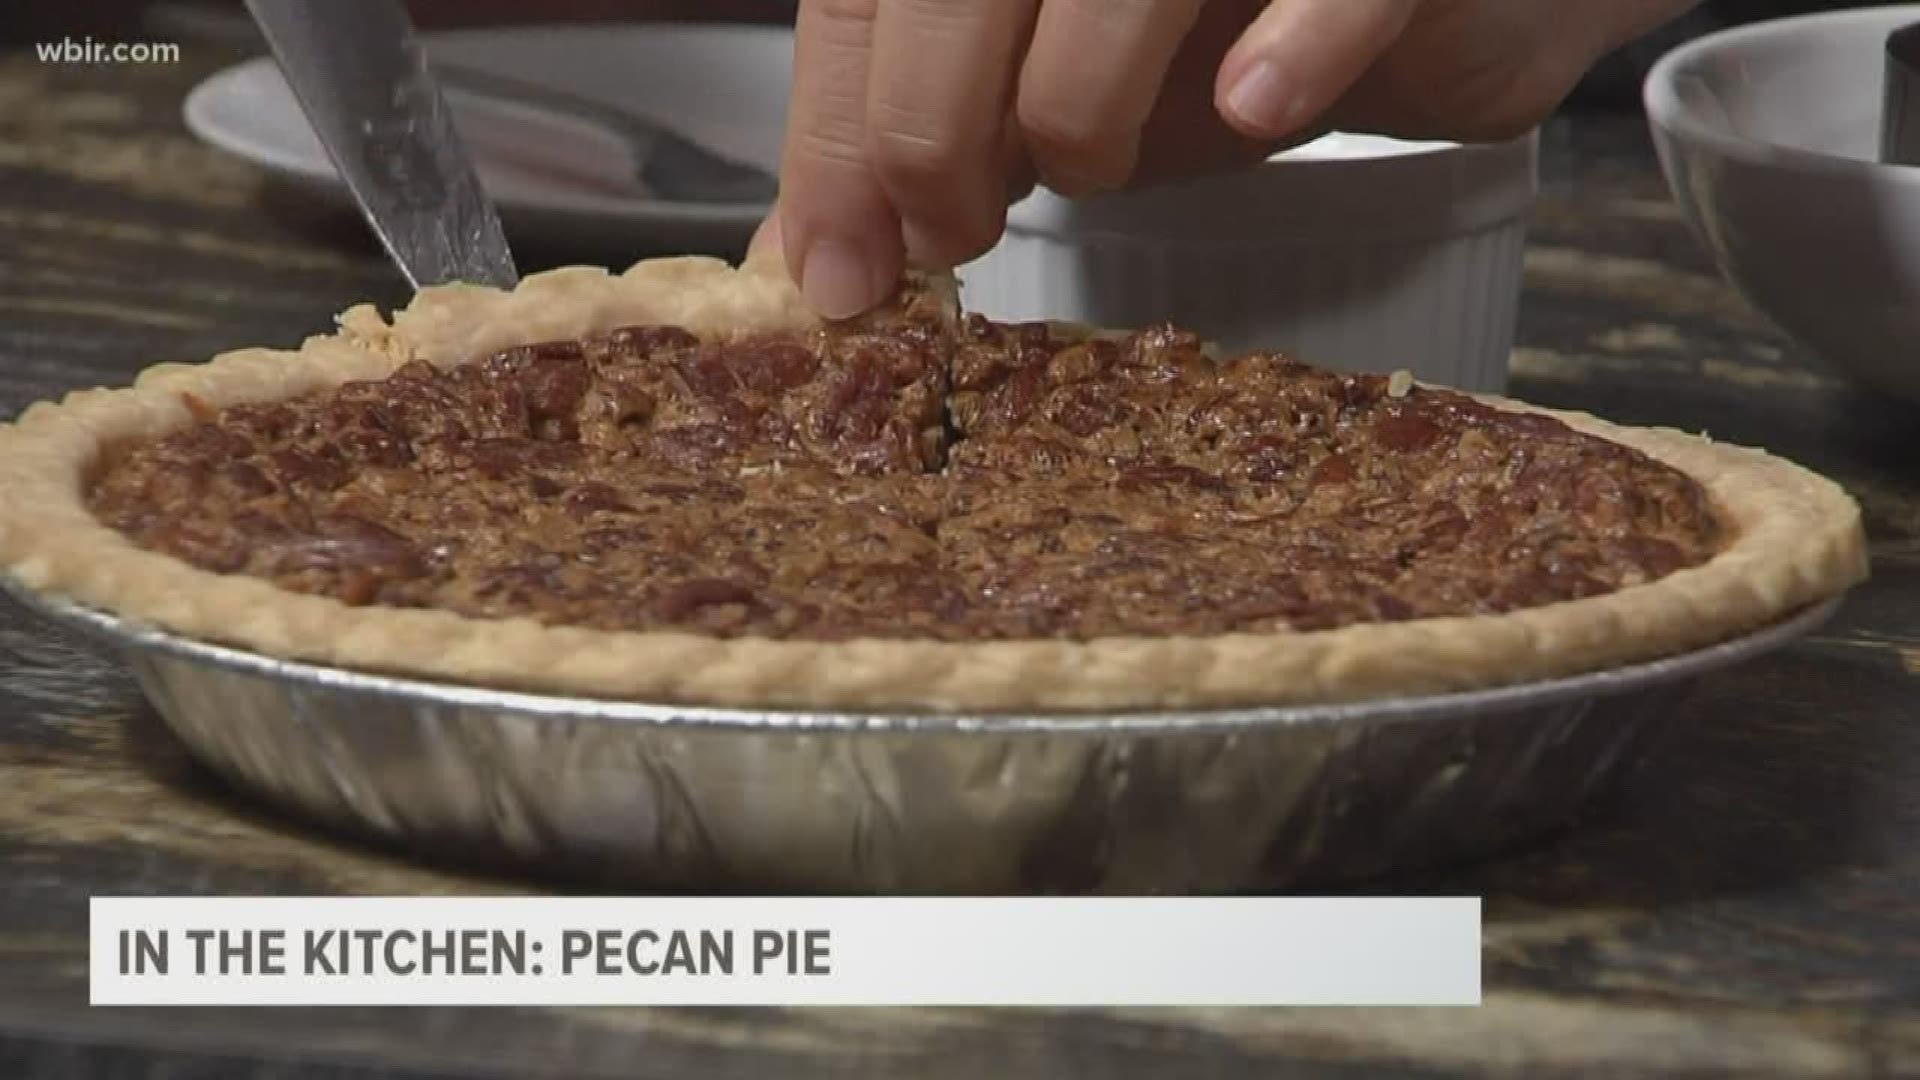 Mahasti Vafaie from the Tomato Head is in the kitchen showing us how to make a Pecan Pie.